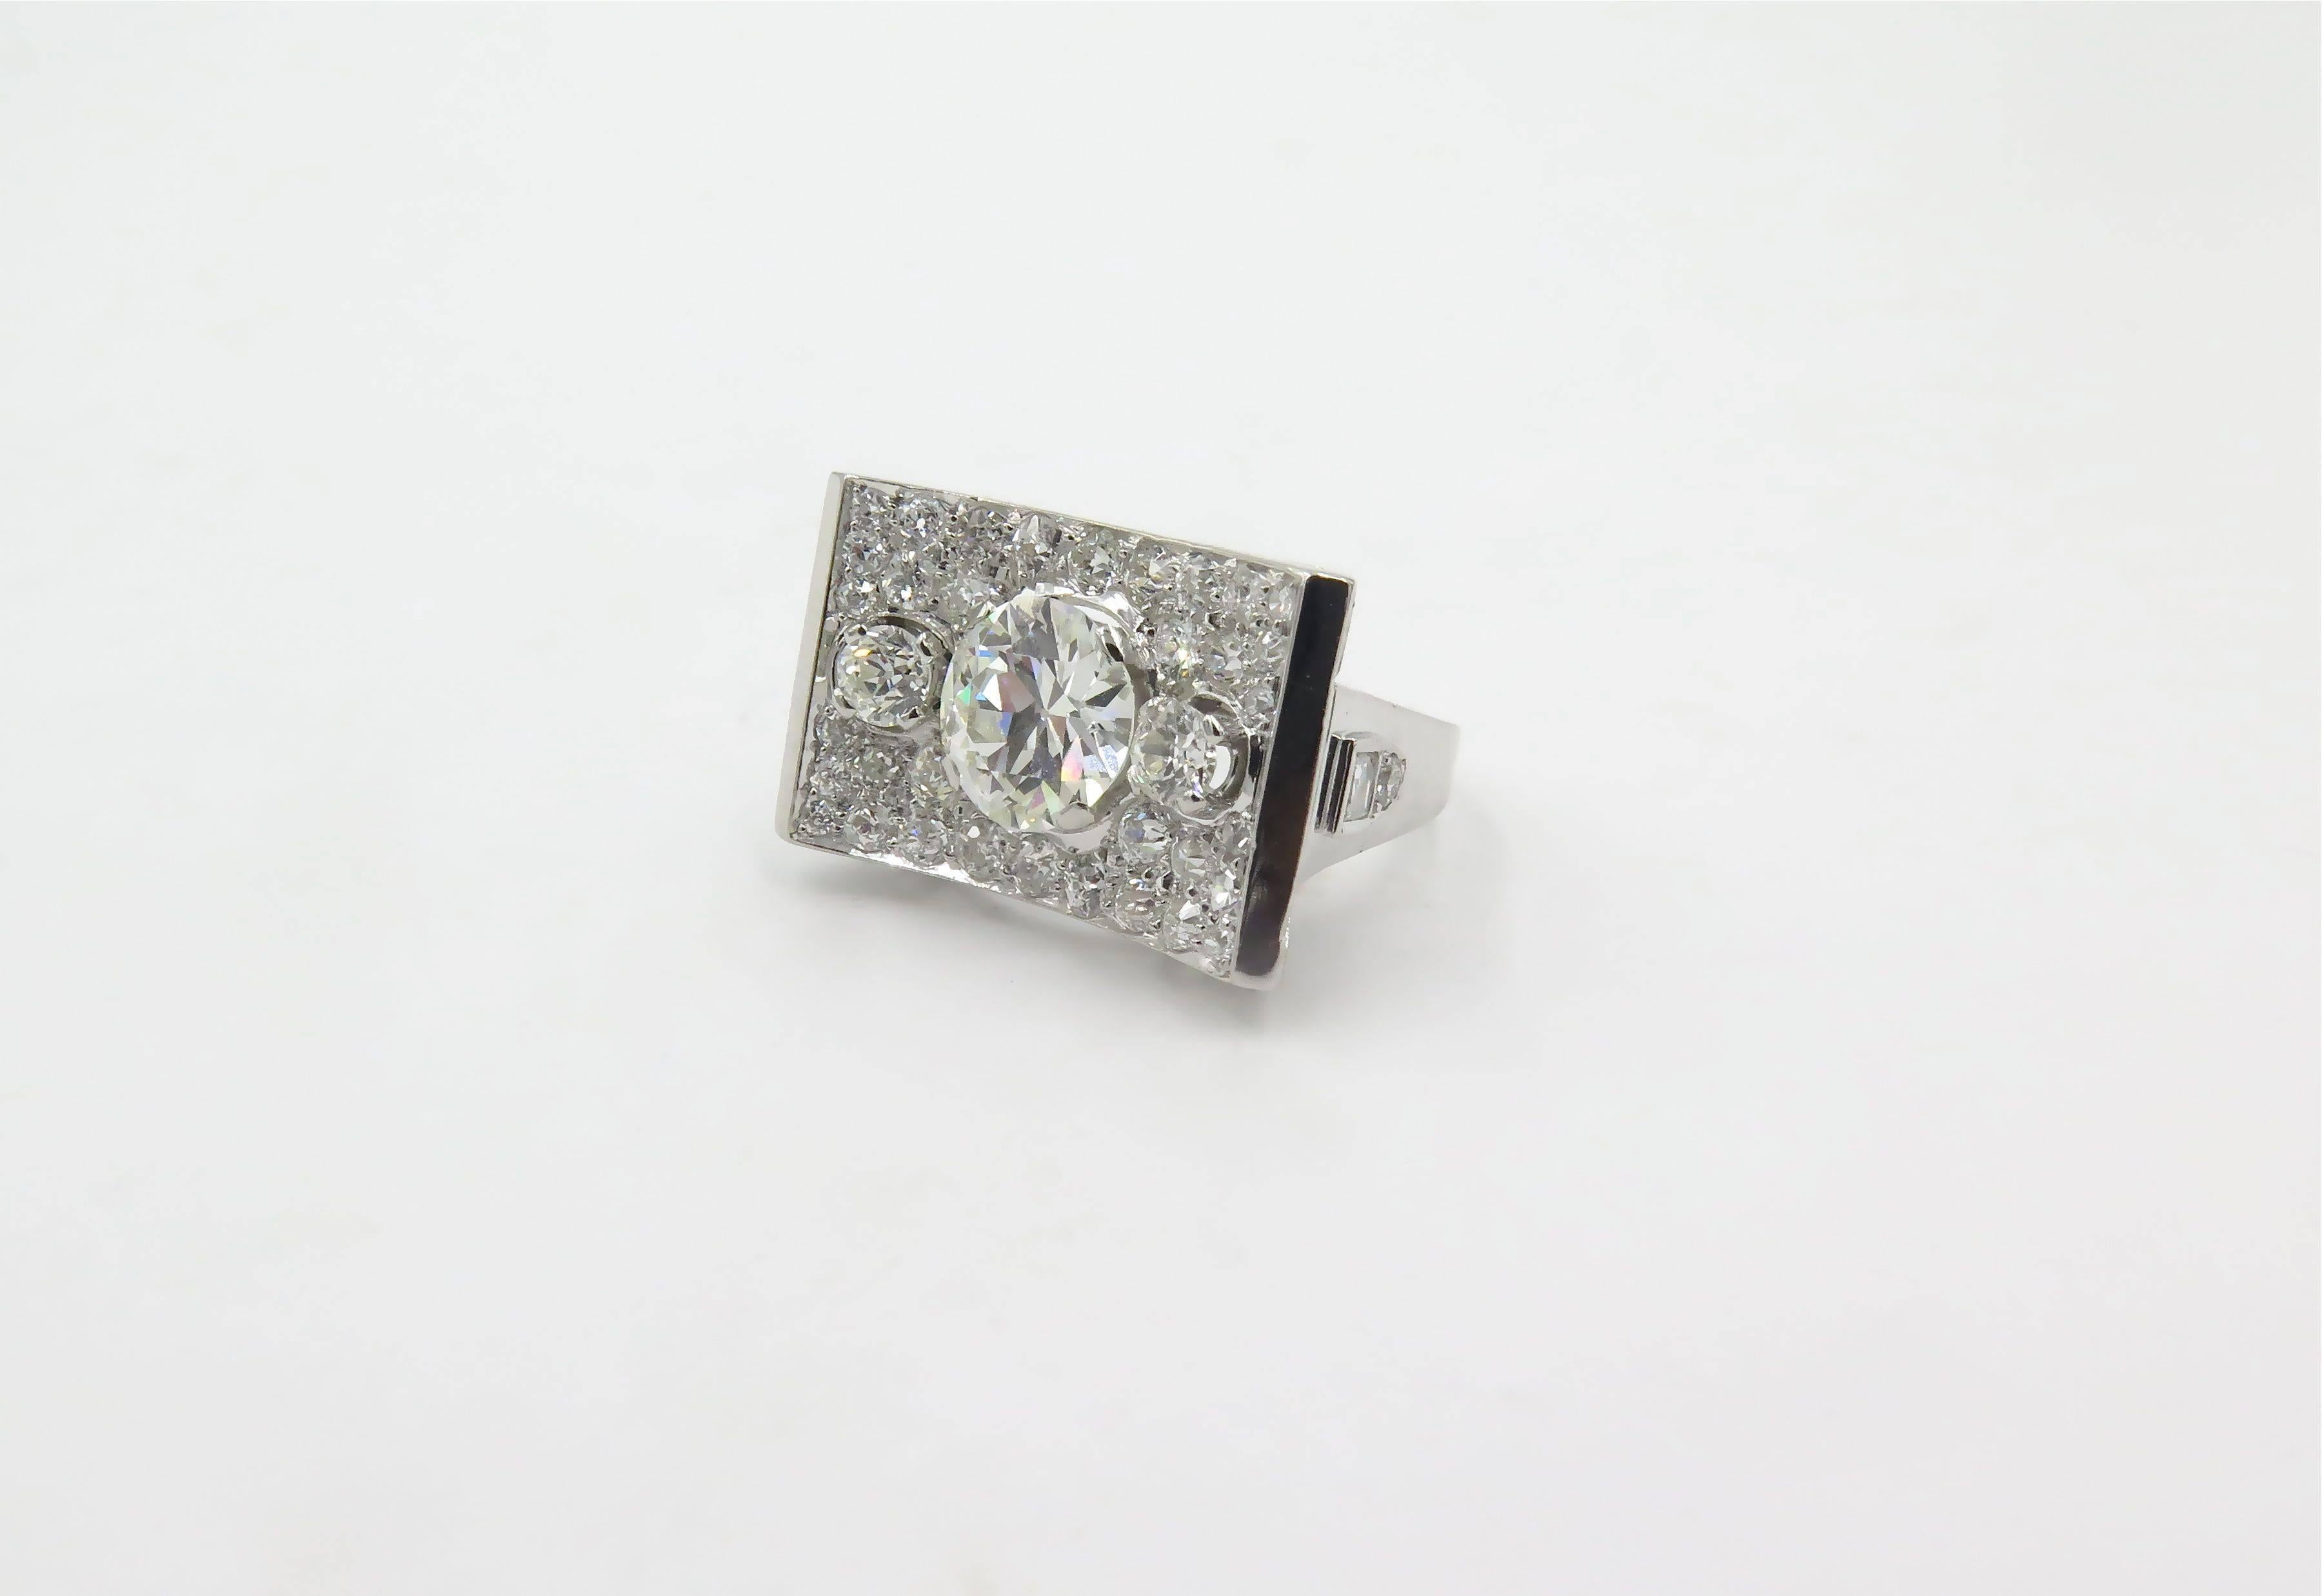 An Art Deco, platinum and diamond ring.  Circa 1930.   Brock.  The ring centers a circular brilliant diamond weighing 1.39 carats, further set with (2) two square cut diamonds and (36) thirty six old mine cut diamonds totaling approximately 2.00